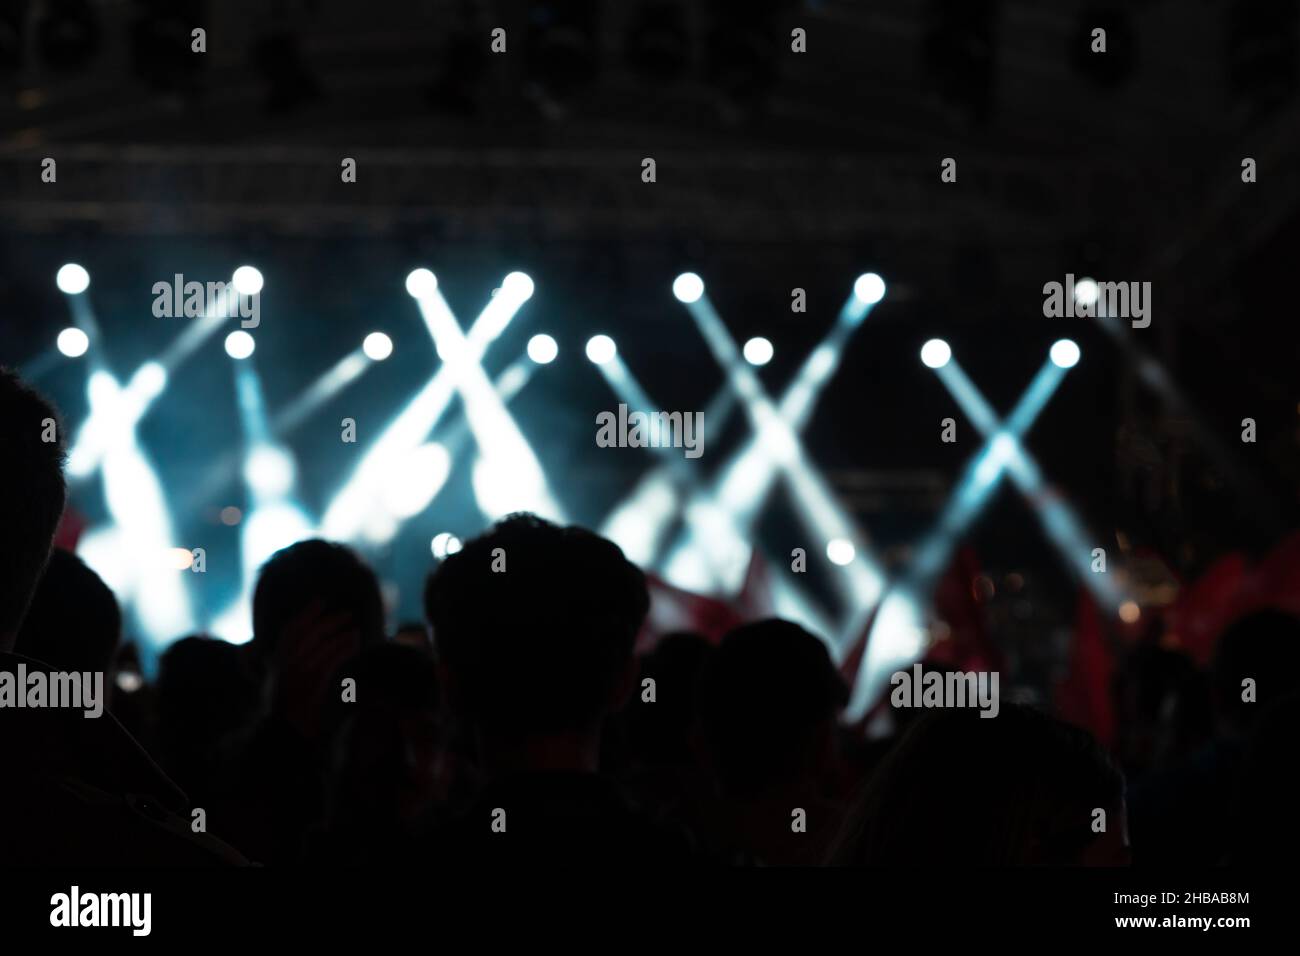 Concert background. Silhouette of crowd in the concert background photo. Stock Photo